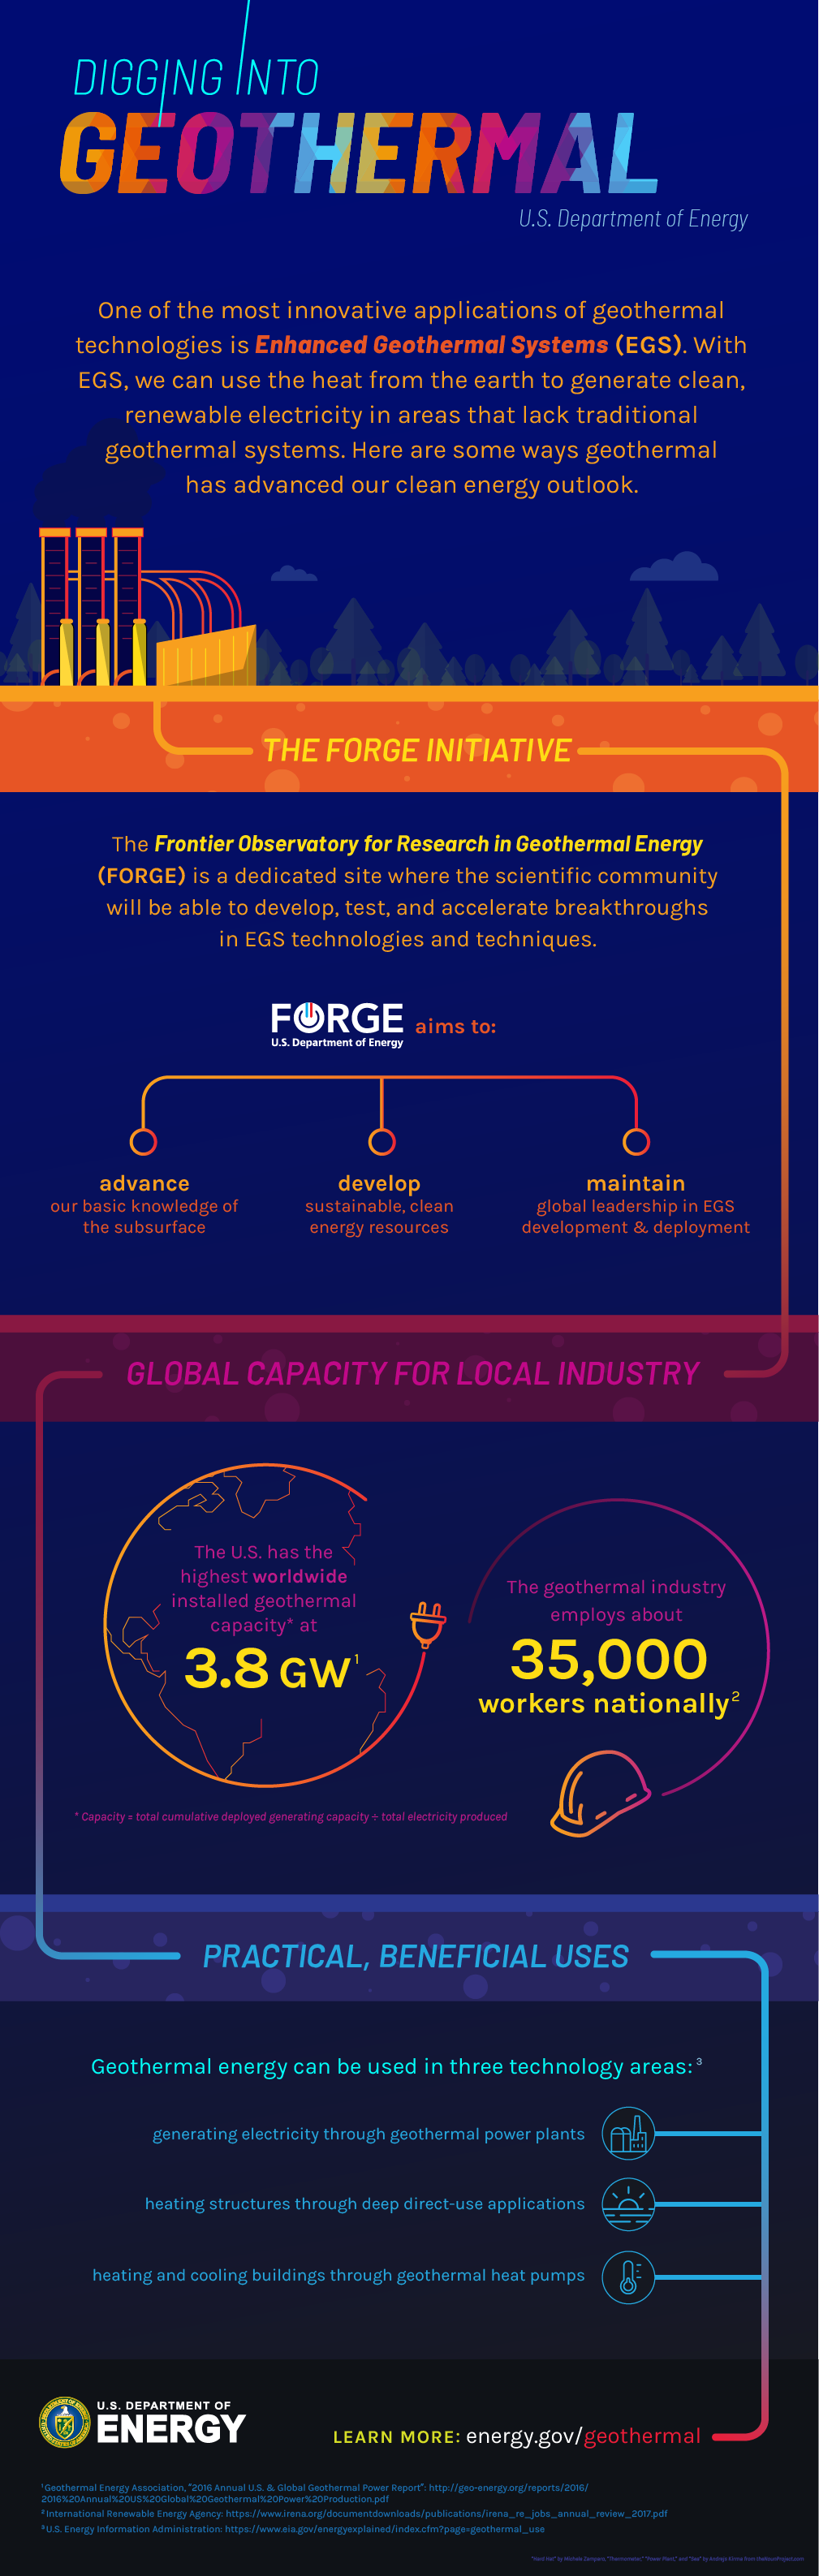 FORGE_geothermal_infographic2018